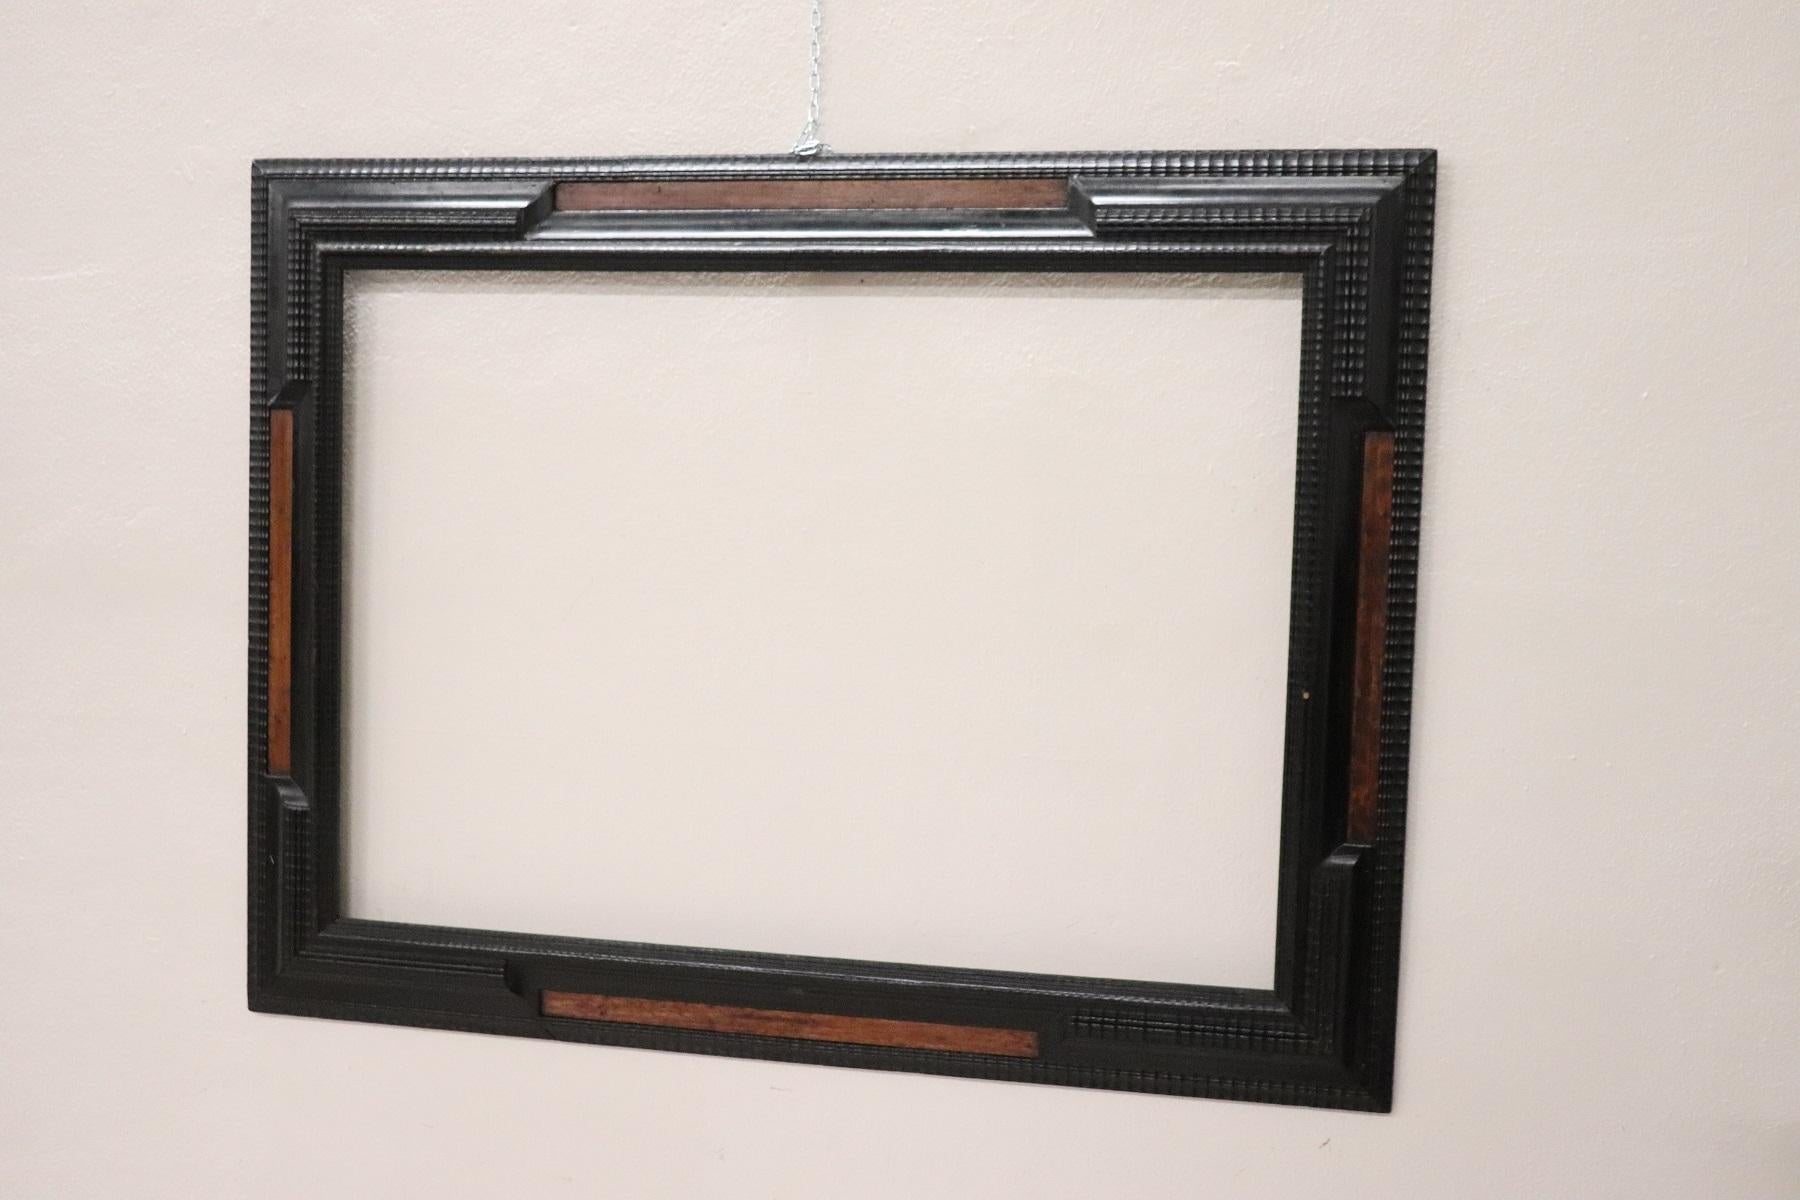 Refined frame from the end of the 19th century, a typical decoration called guilloché made of wood and ebonized in black tint as the taste of the period required.